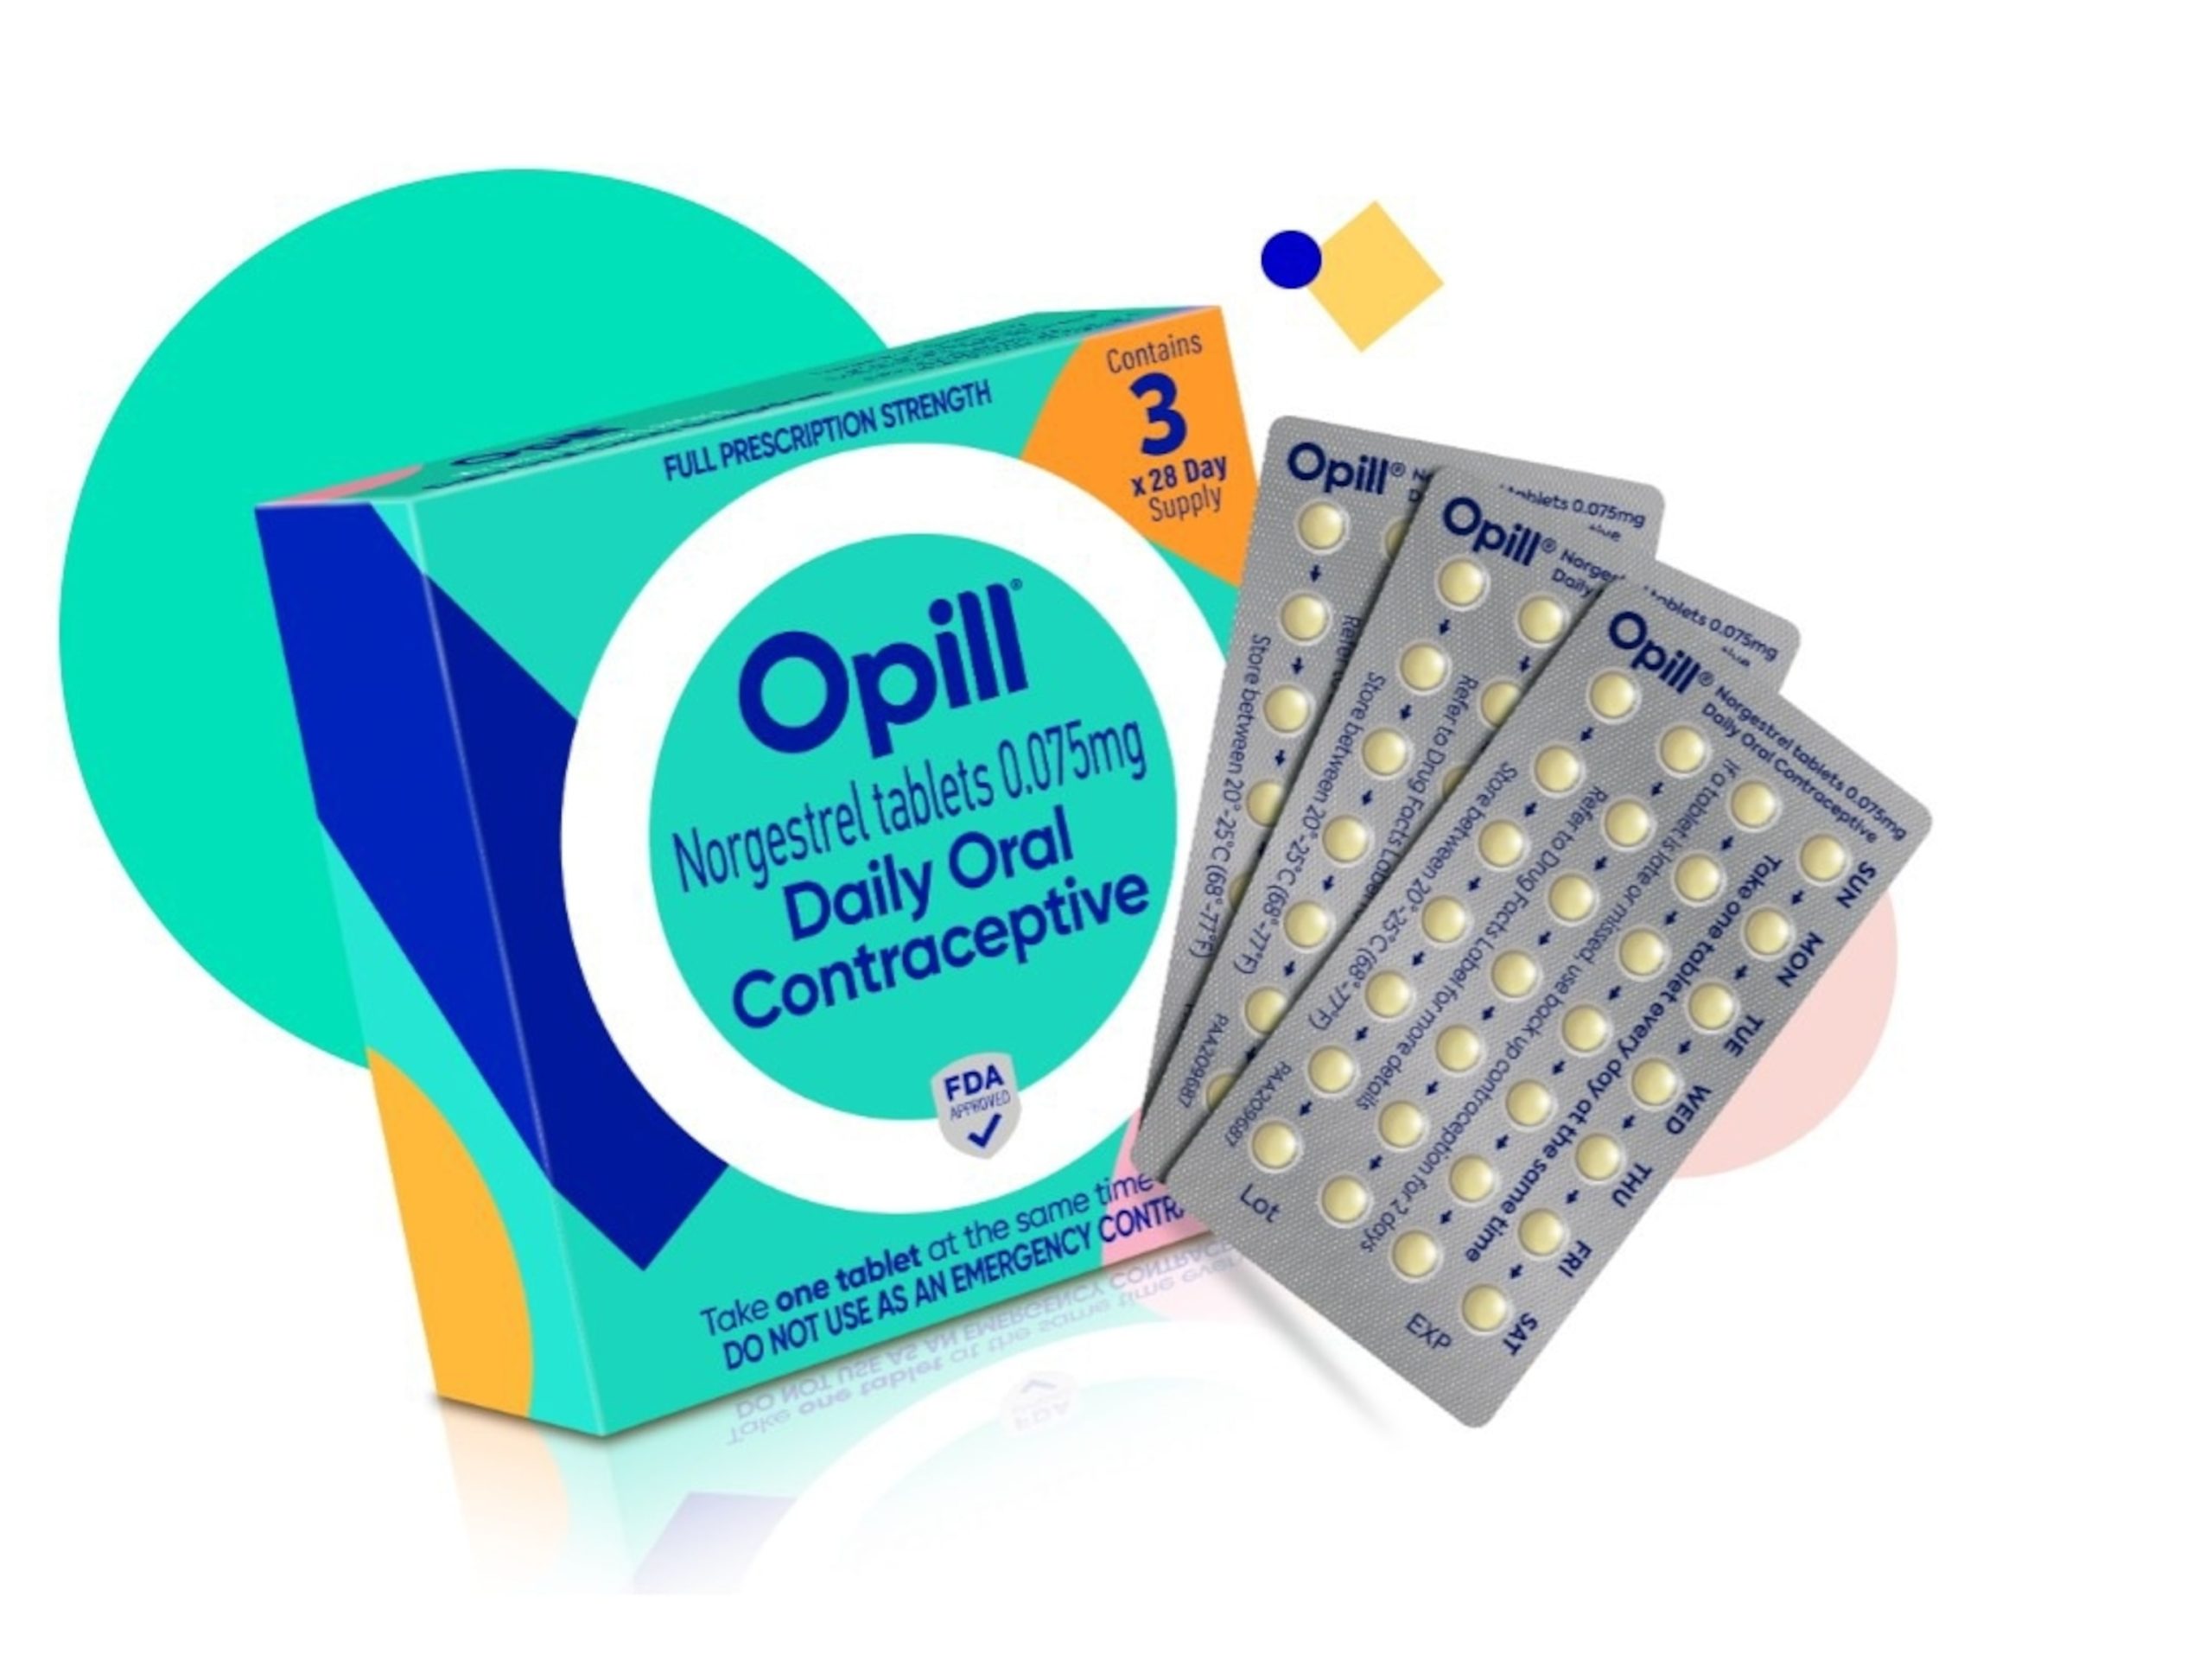 Opill, the first over-the-counter birth control pill, set to be released for sale this month